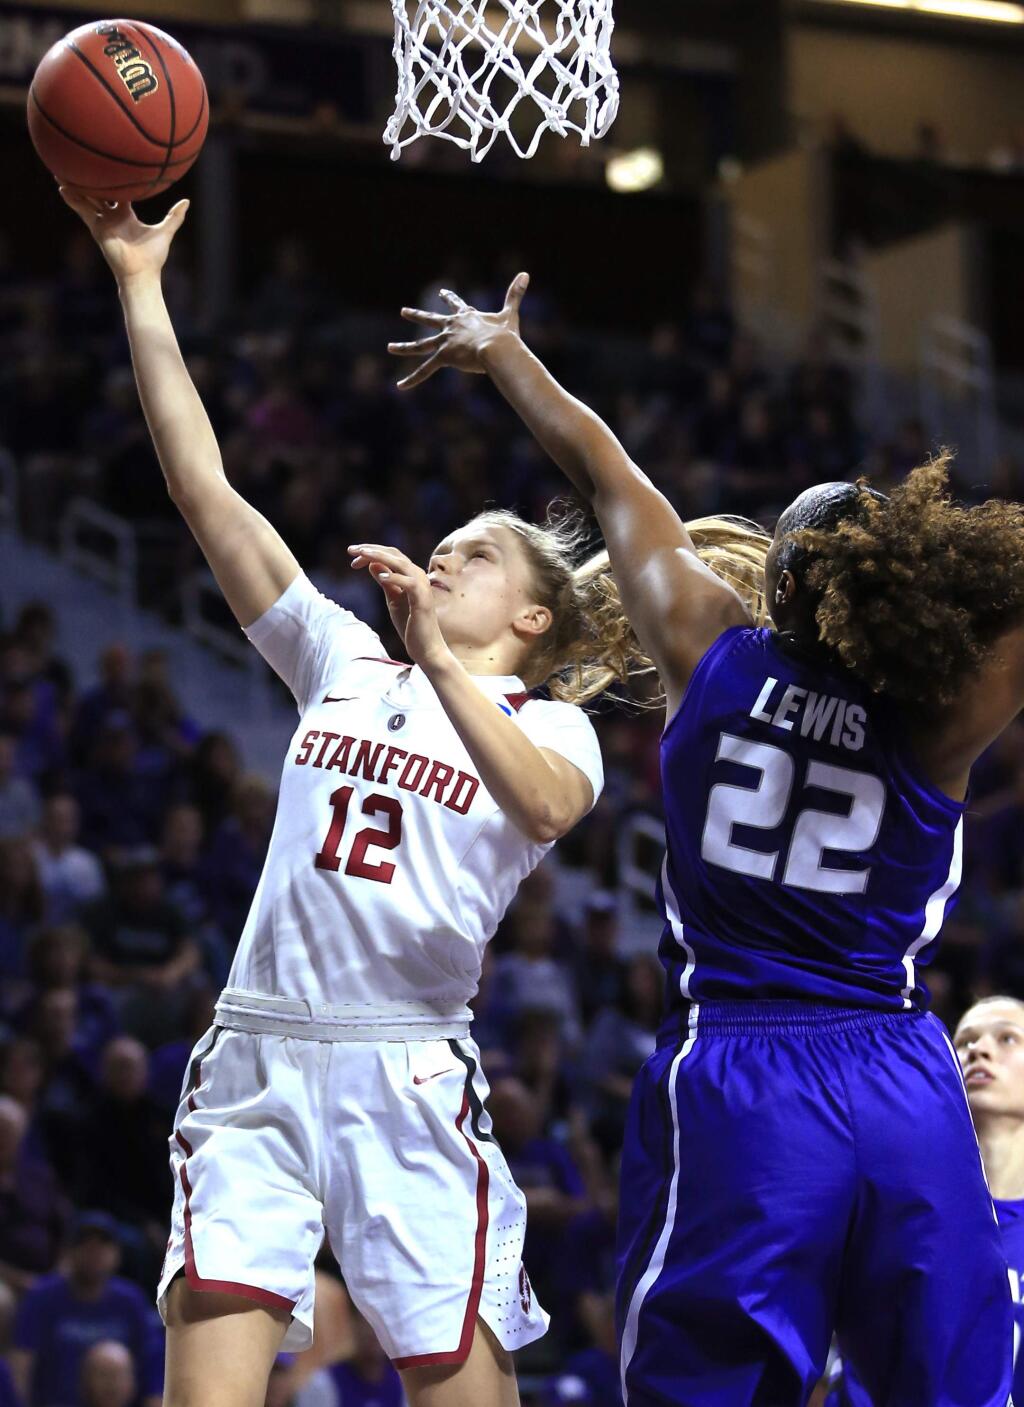 Stanford guard Brittany McPhee (12) makes a basket after getting past Kansas State forward Breanna Lewis (22) during the first half of a second-round game in the NCAA women's college basketball tournament in Manhattan, Kan., Monday, March 20, 2017. (AP Photo/Orlin Wagner)